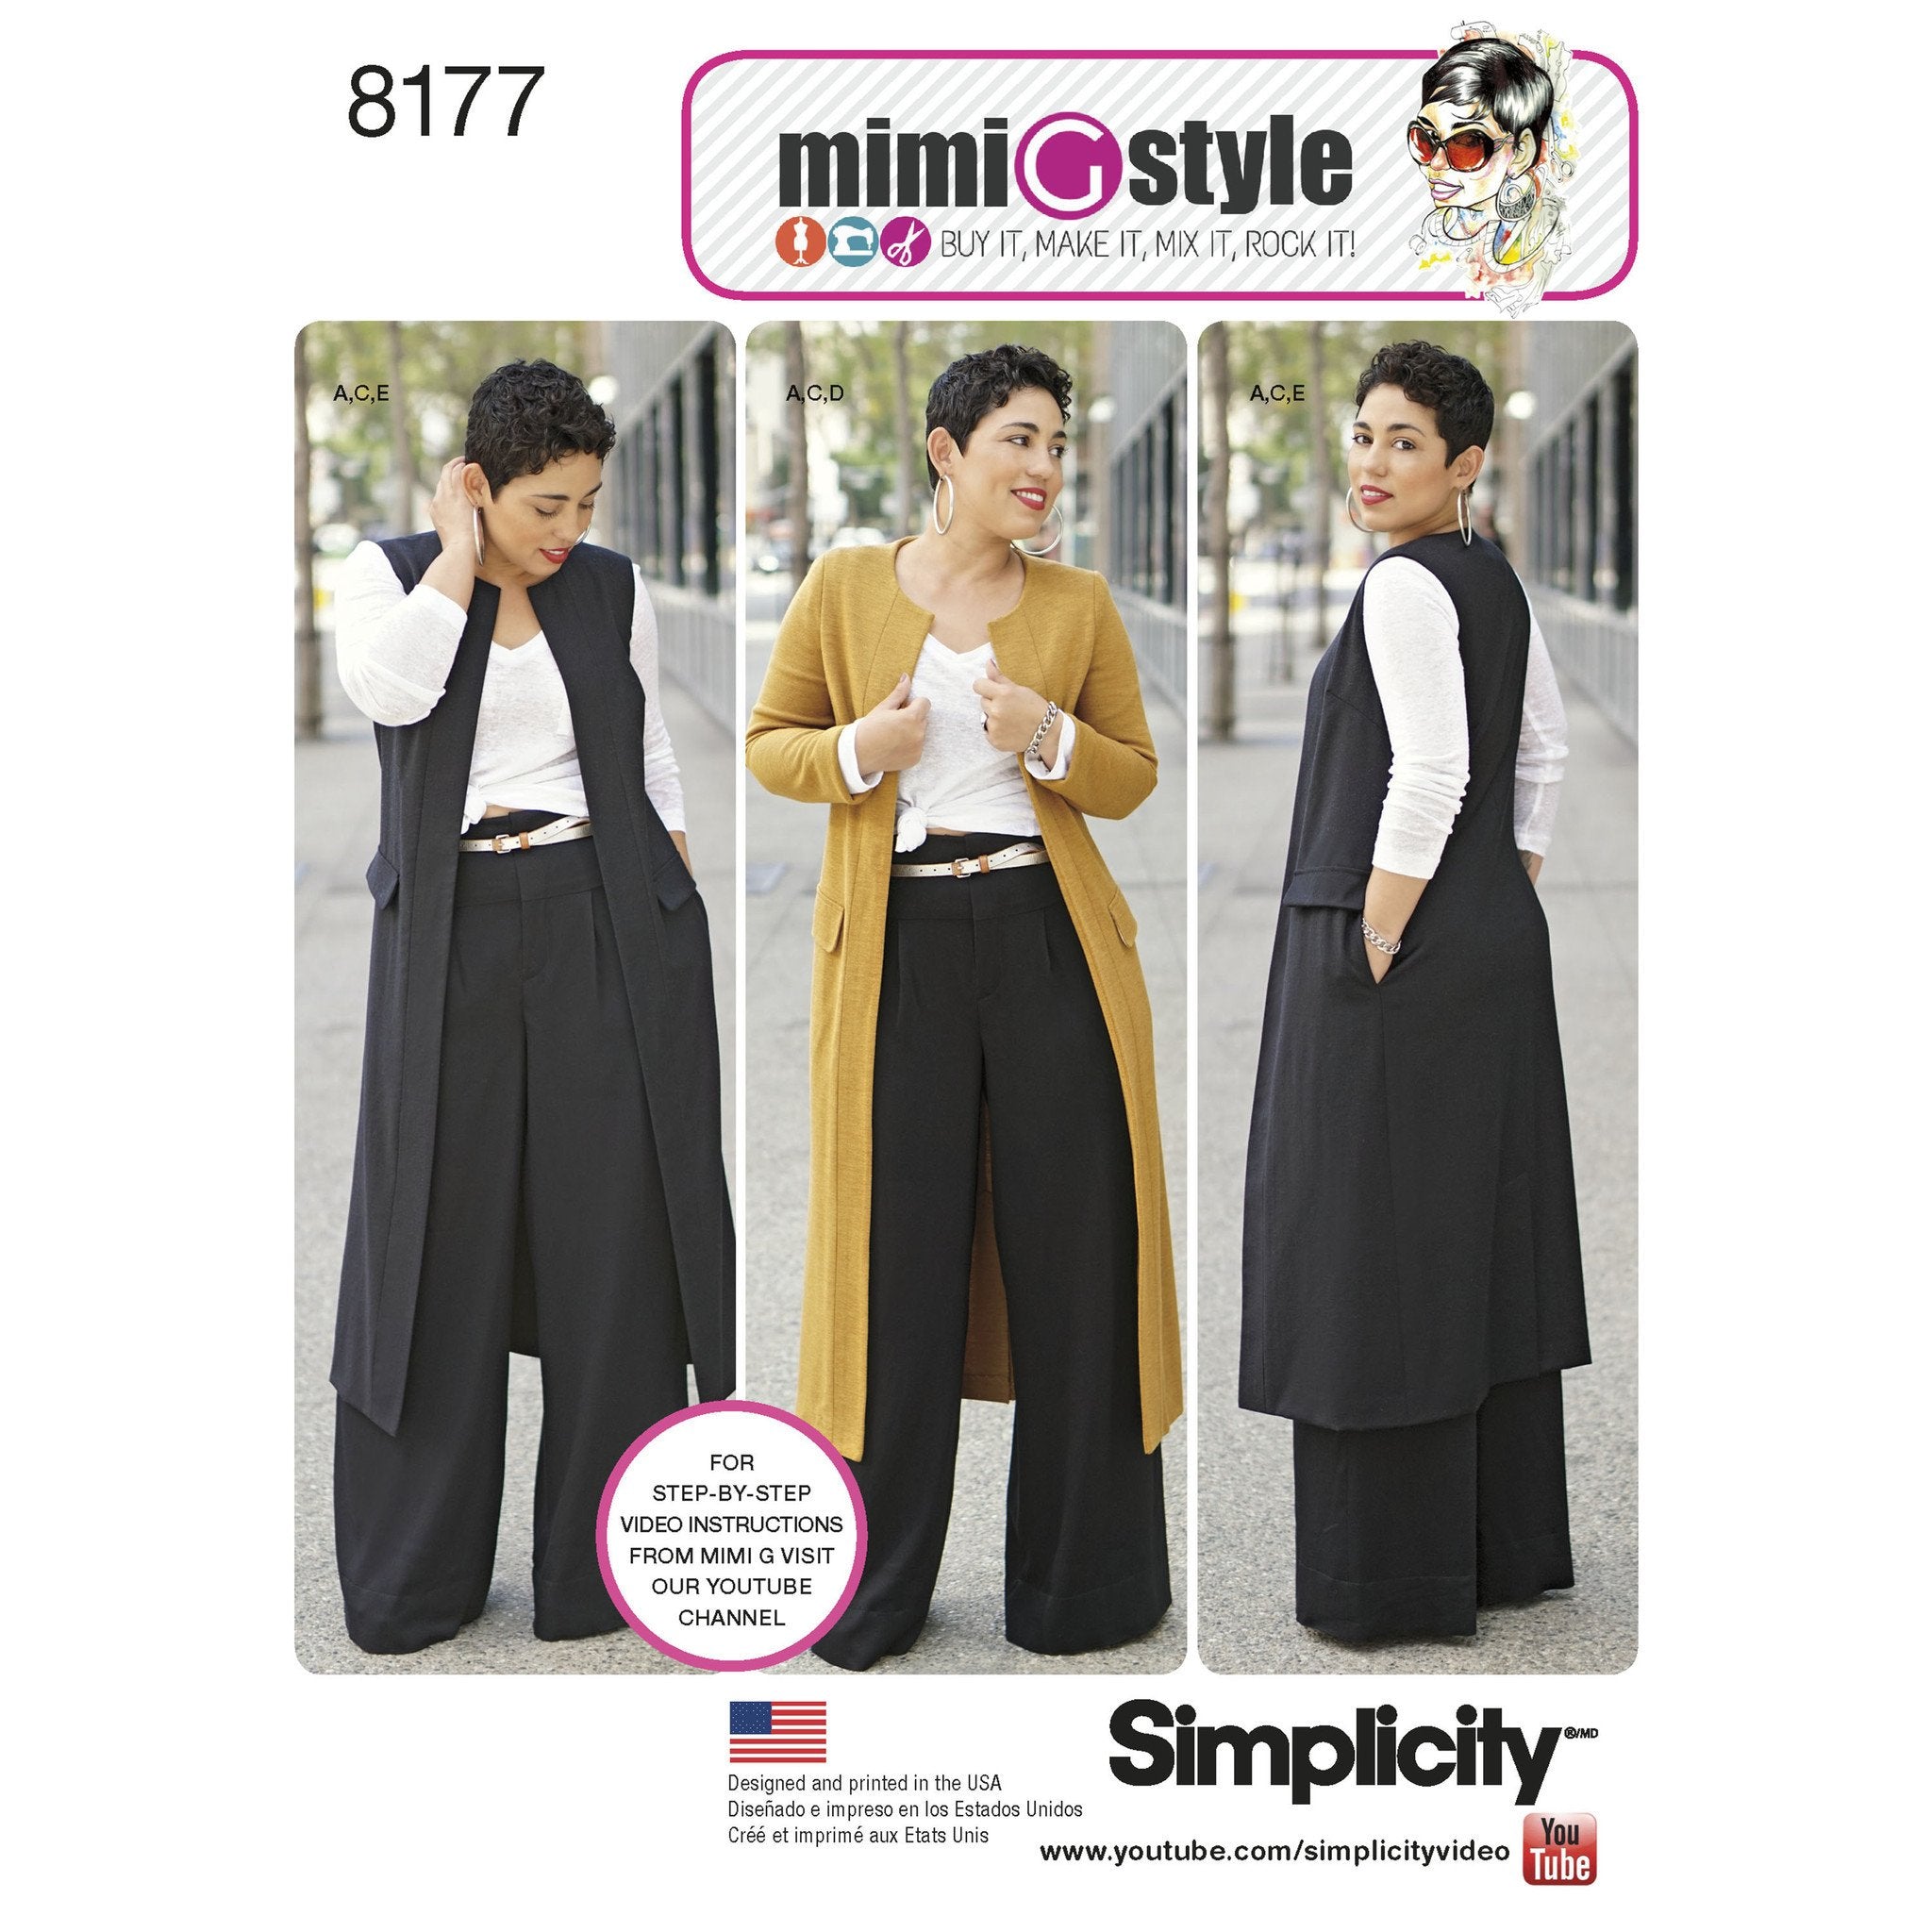 Simplicity Pattern 8177 features a duster length coat or vest, from Jaycotts Sewing Supplies